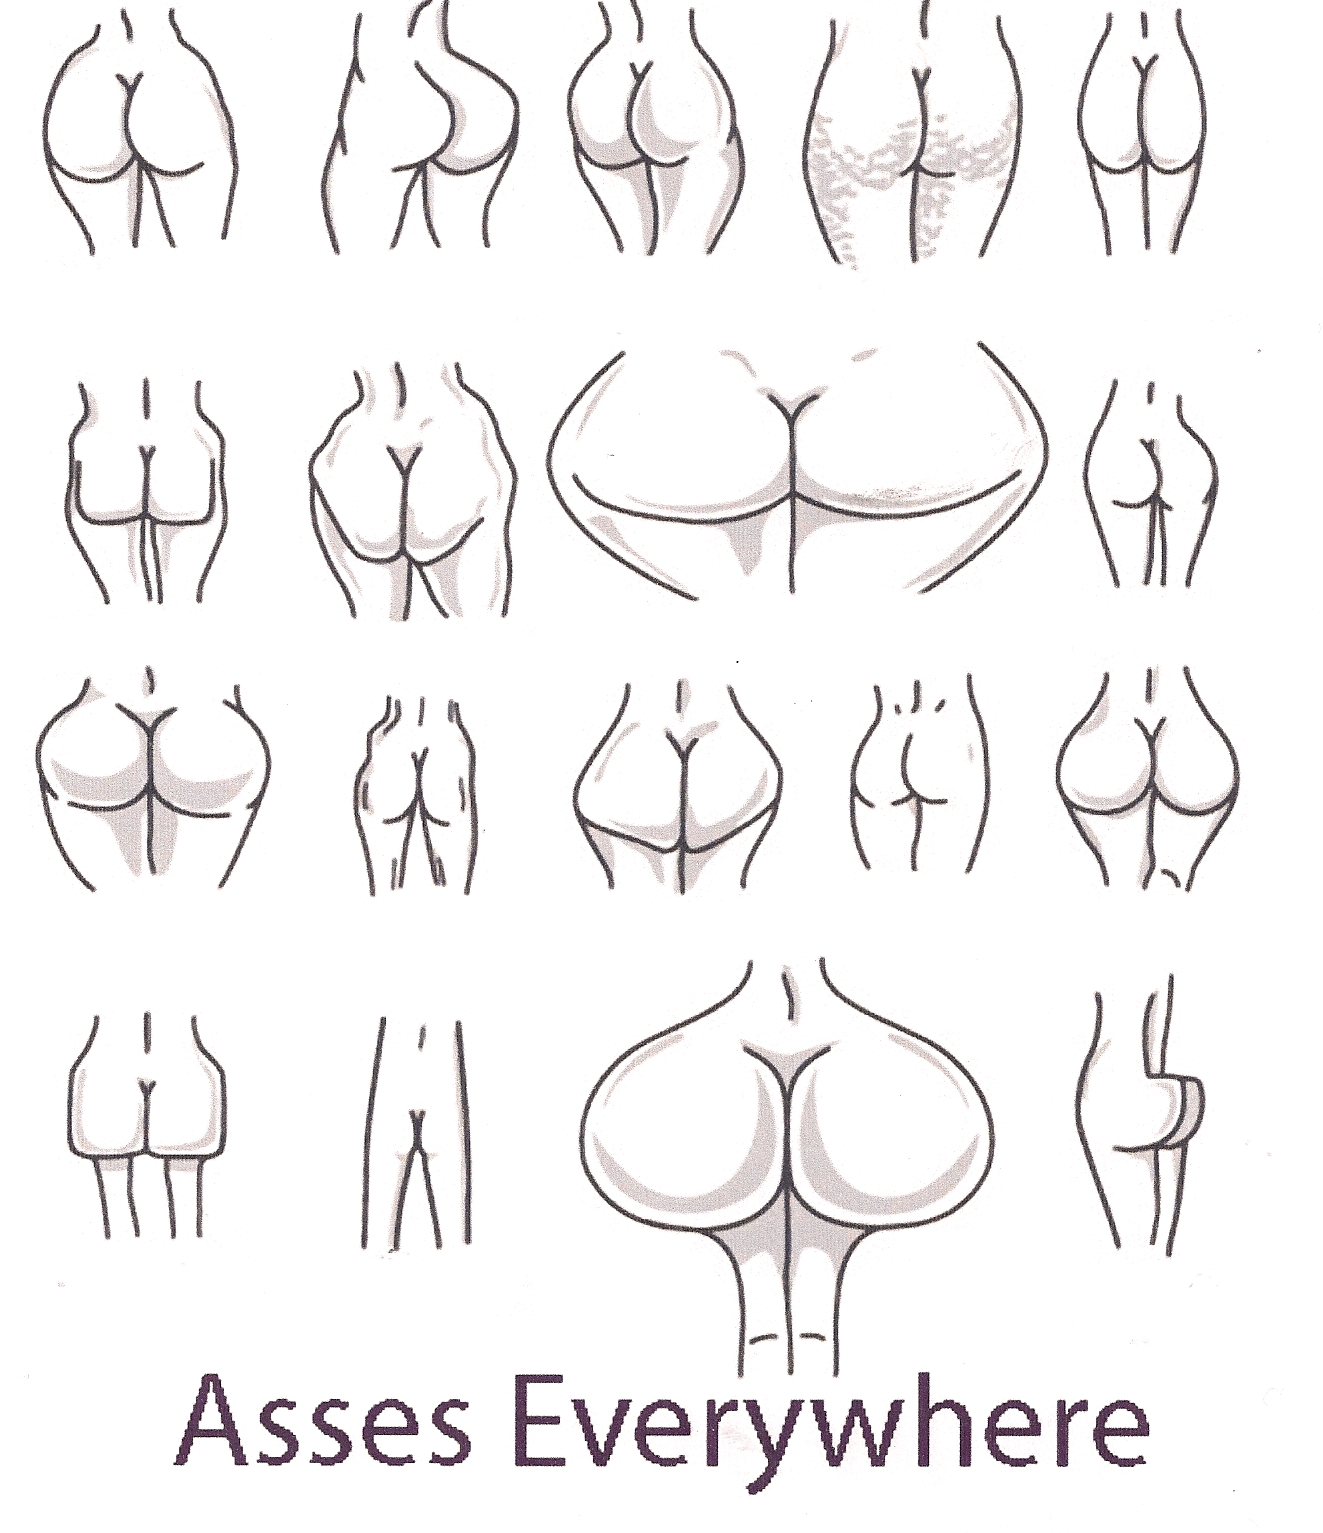 No matter where you go. They will be asses everywhere. 